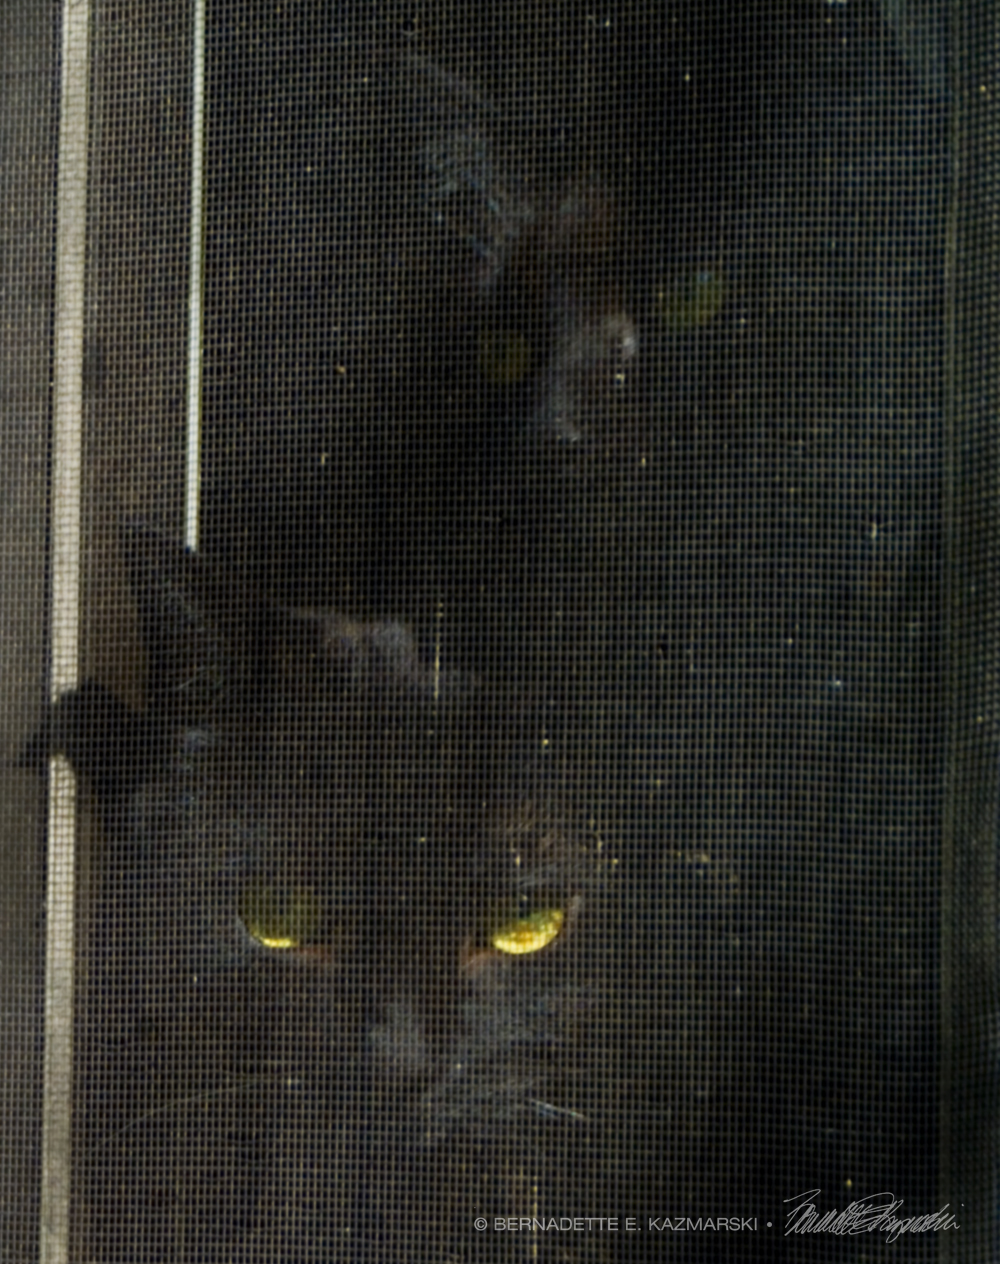 two black cats at window screen